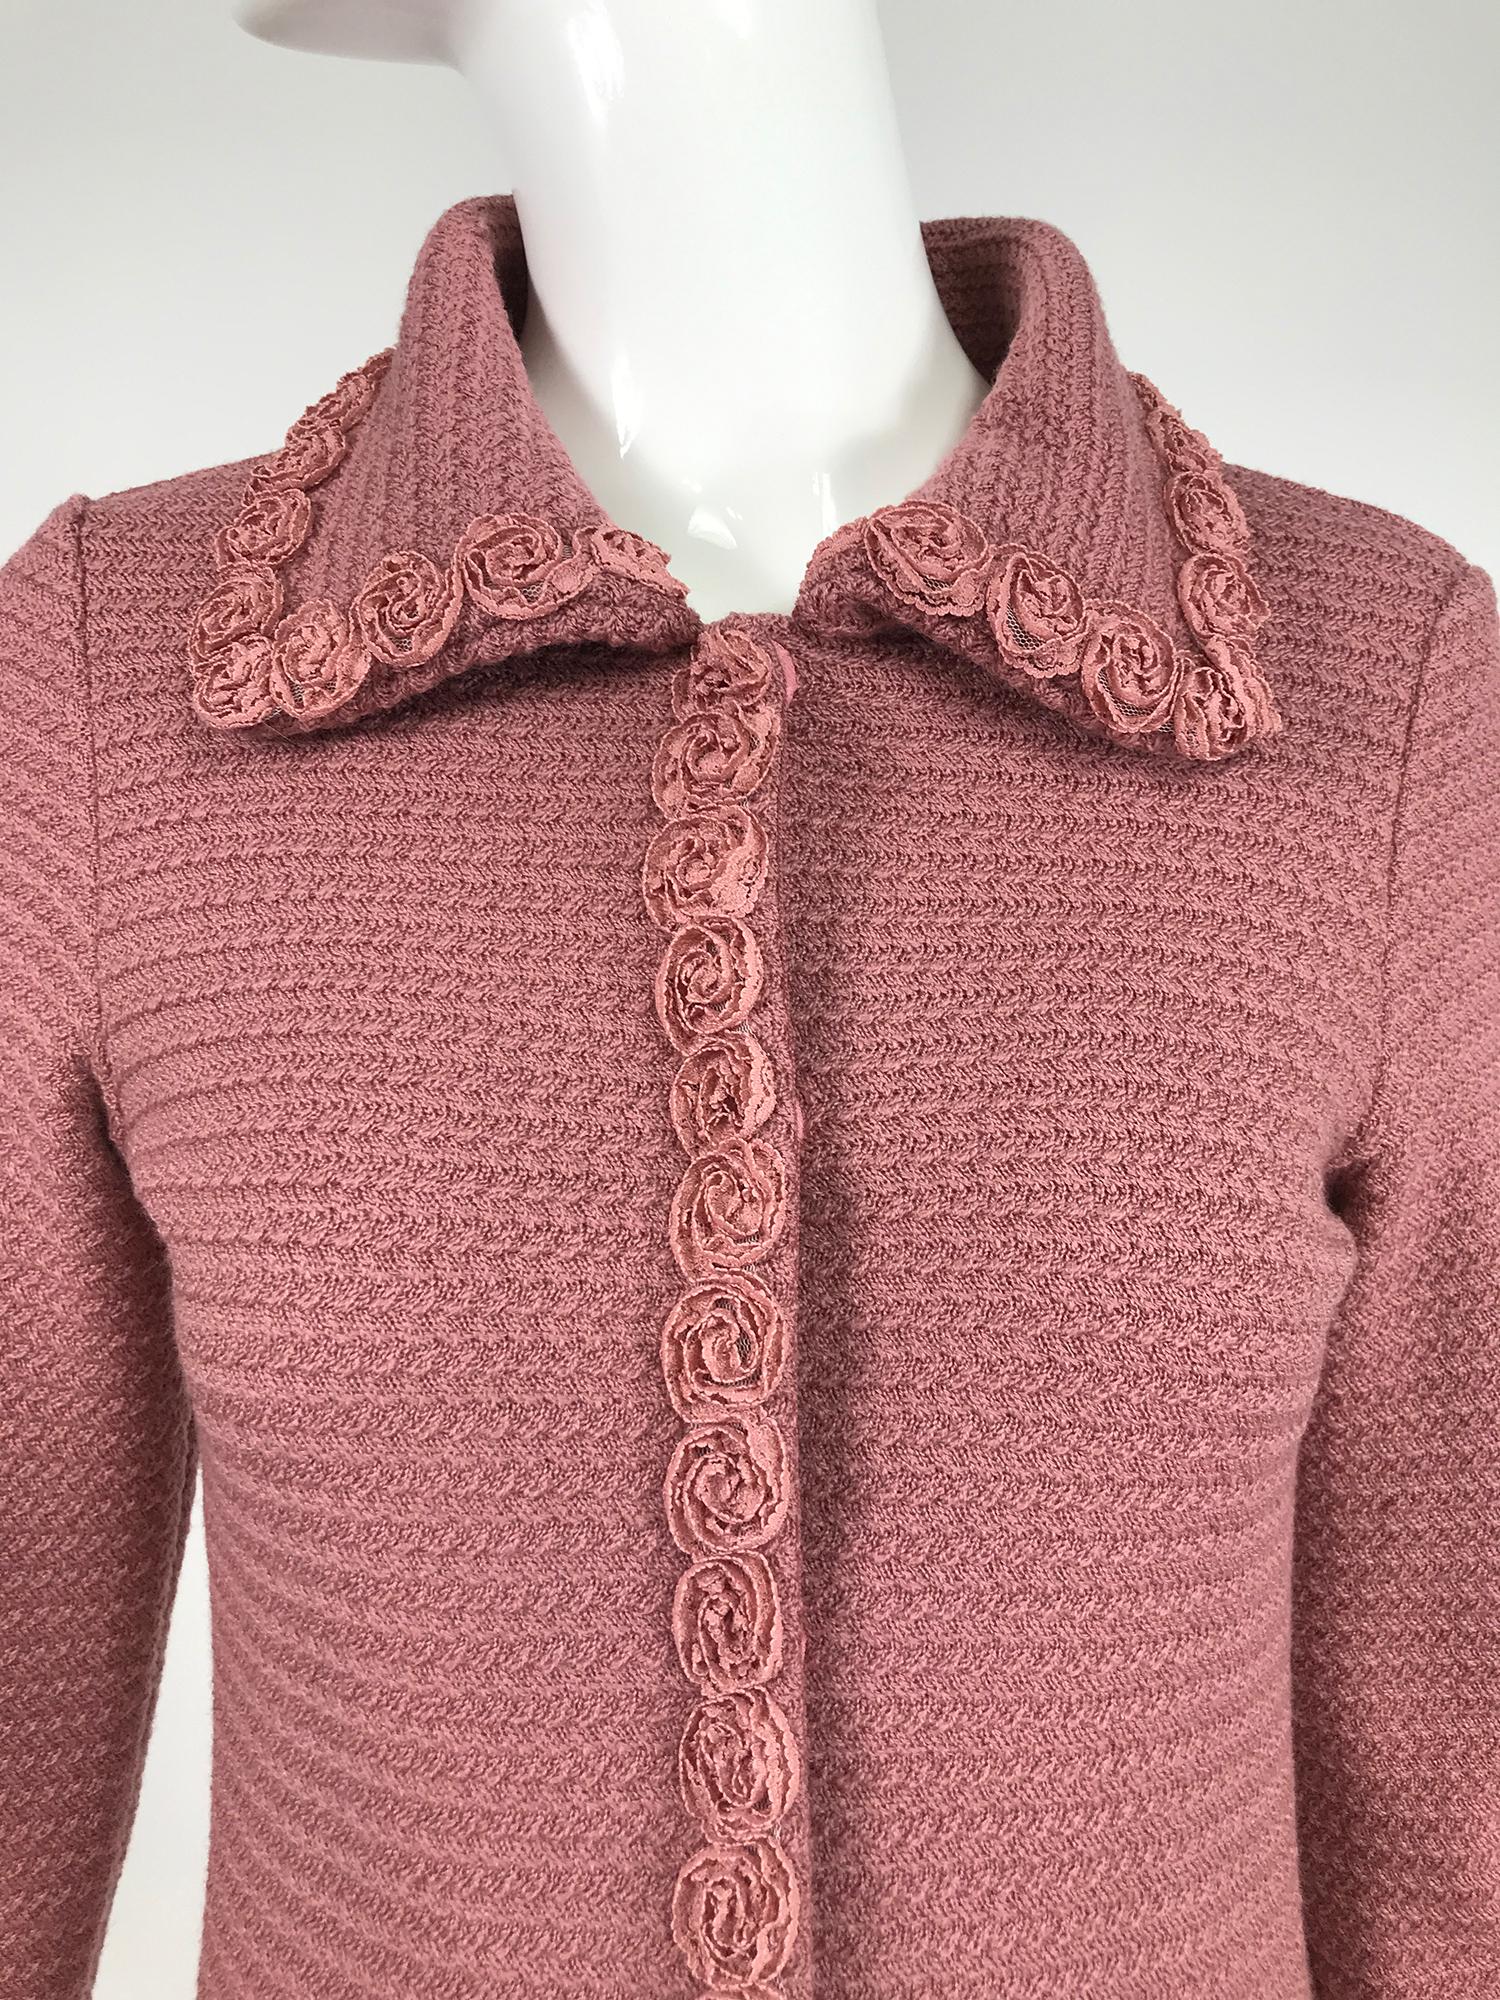 Moschino Pink Wool Knit Coat with Rosette Lace Trims 8